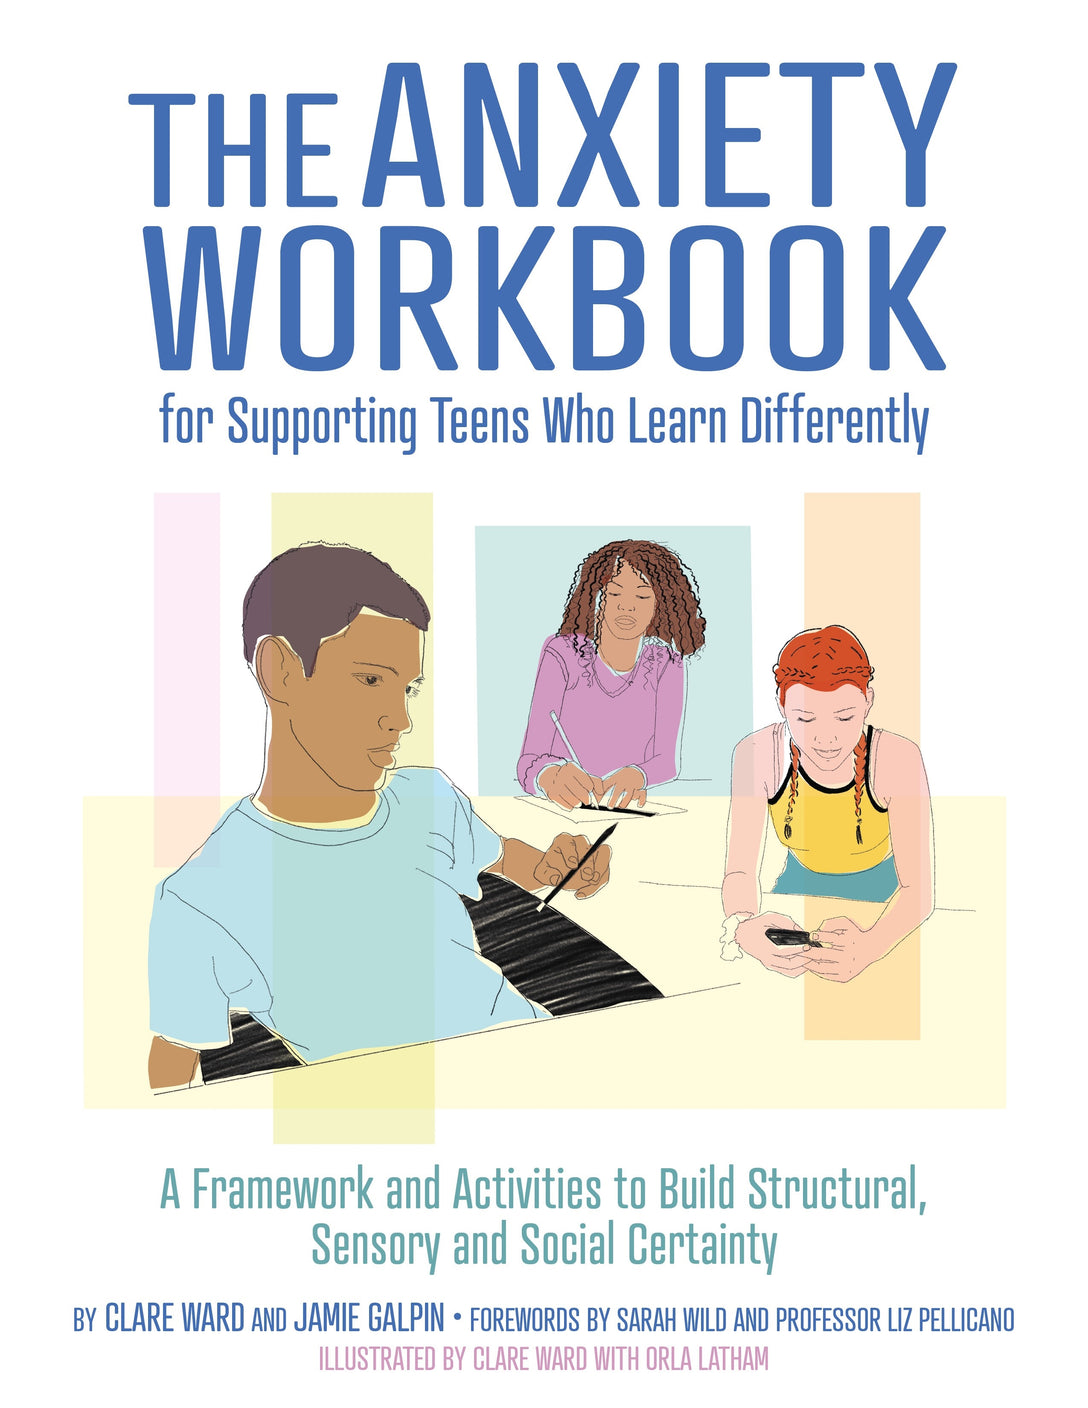 The Anxiety Workbook for Supporting Teens Who Learn Differently by Clare Ward, James Galpin, Clare Ward, Sarah Wild, Liz Pellicano